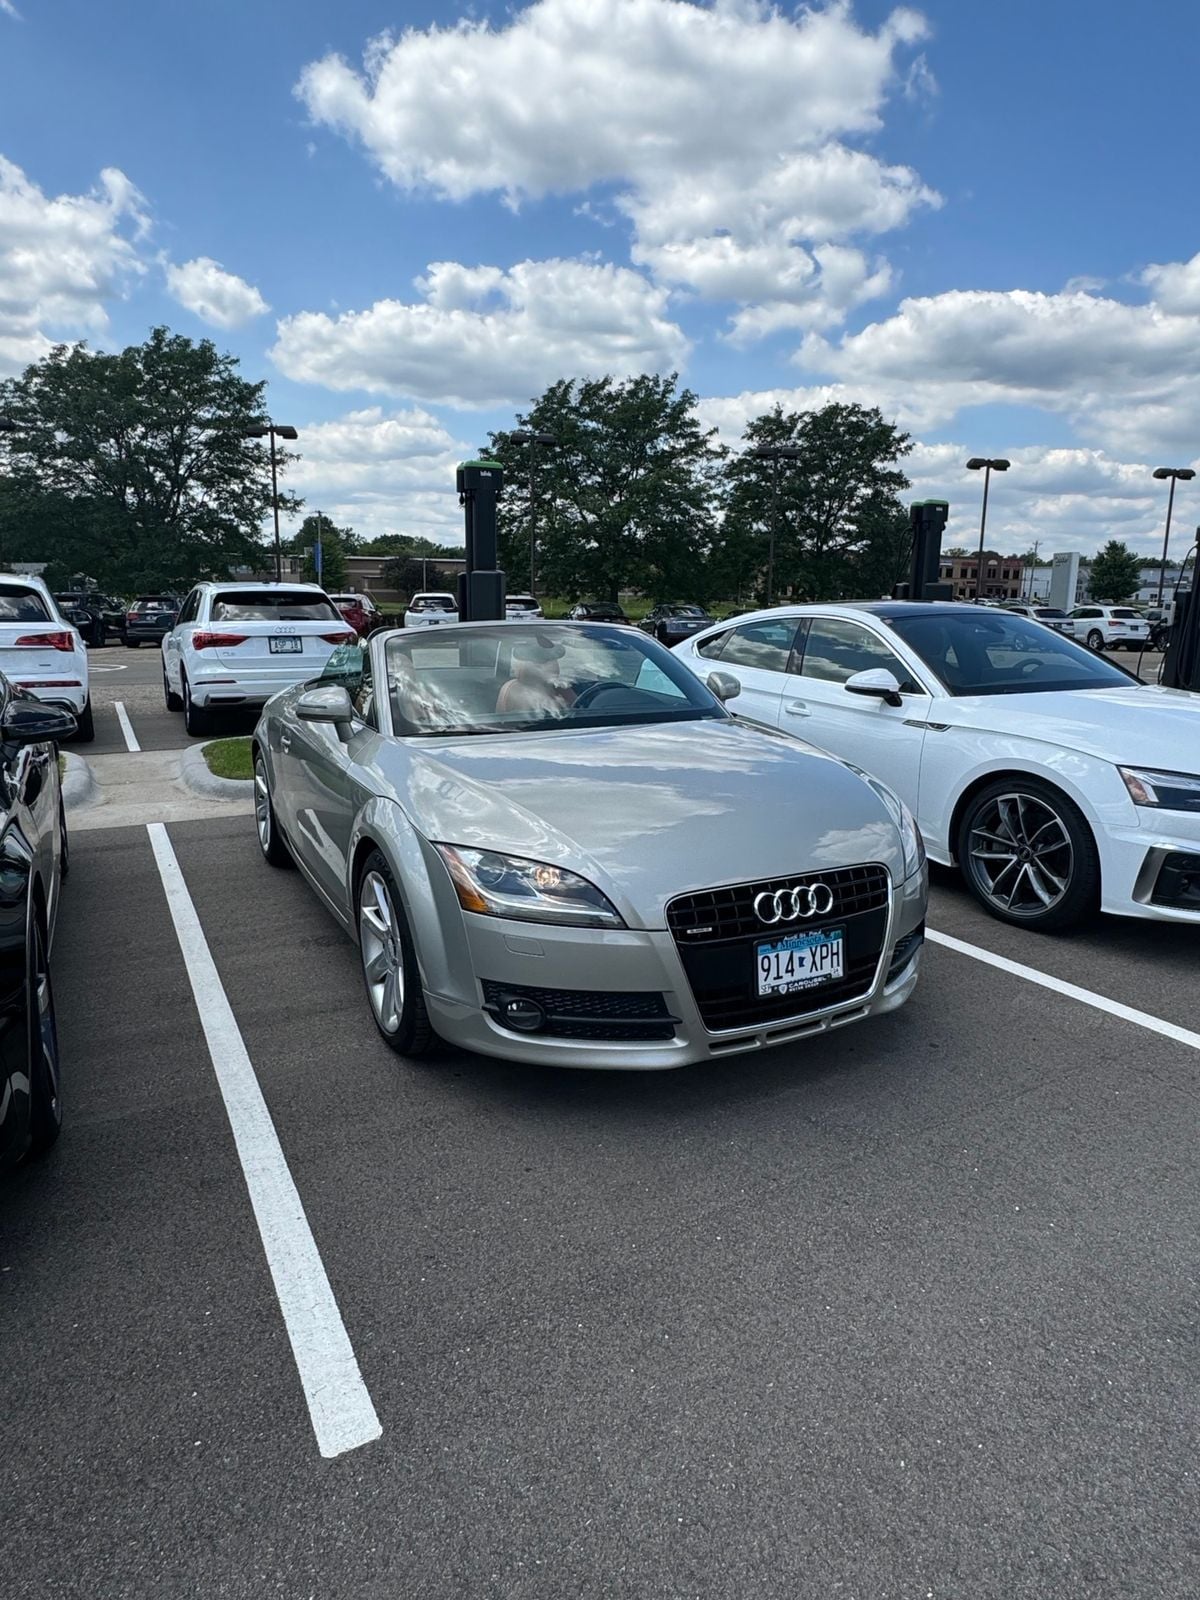 Used 2008 Audi TT Base with VIN TRURD38JX81002165 for sale in Maplewood, MN